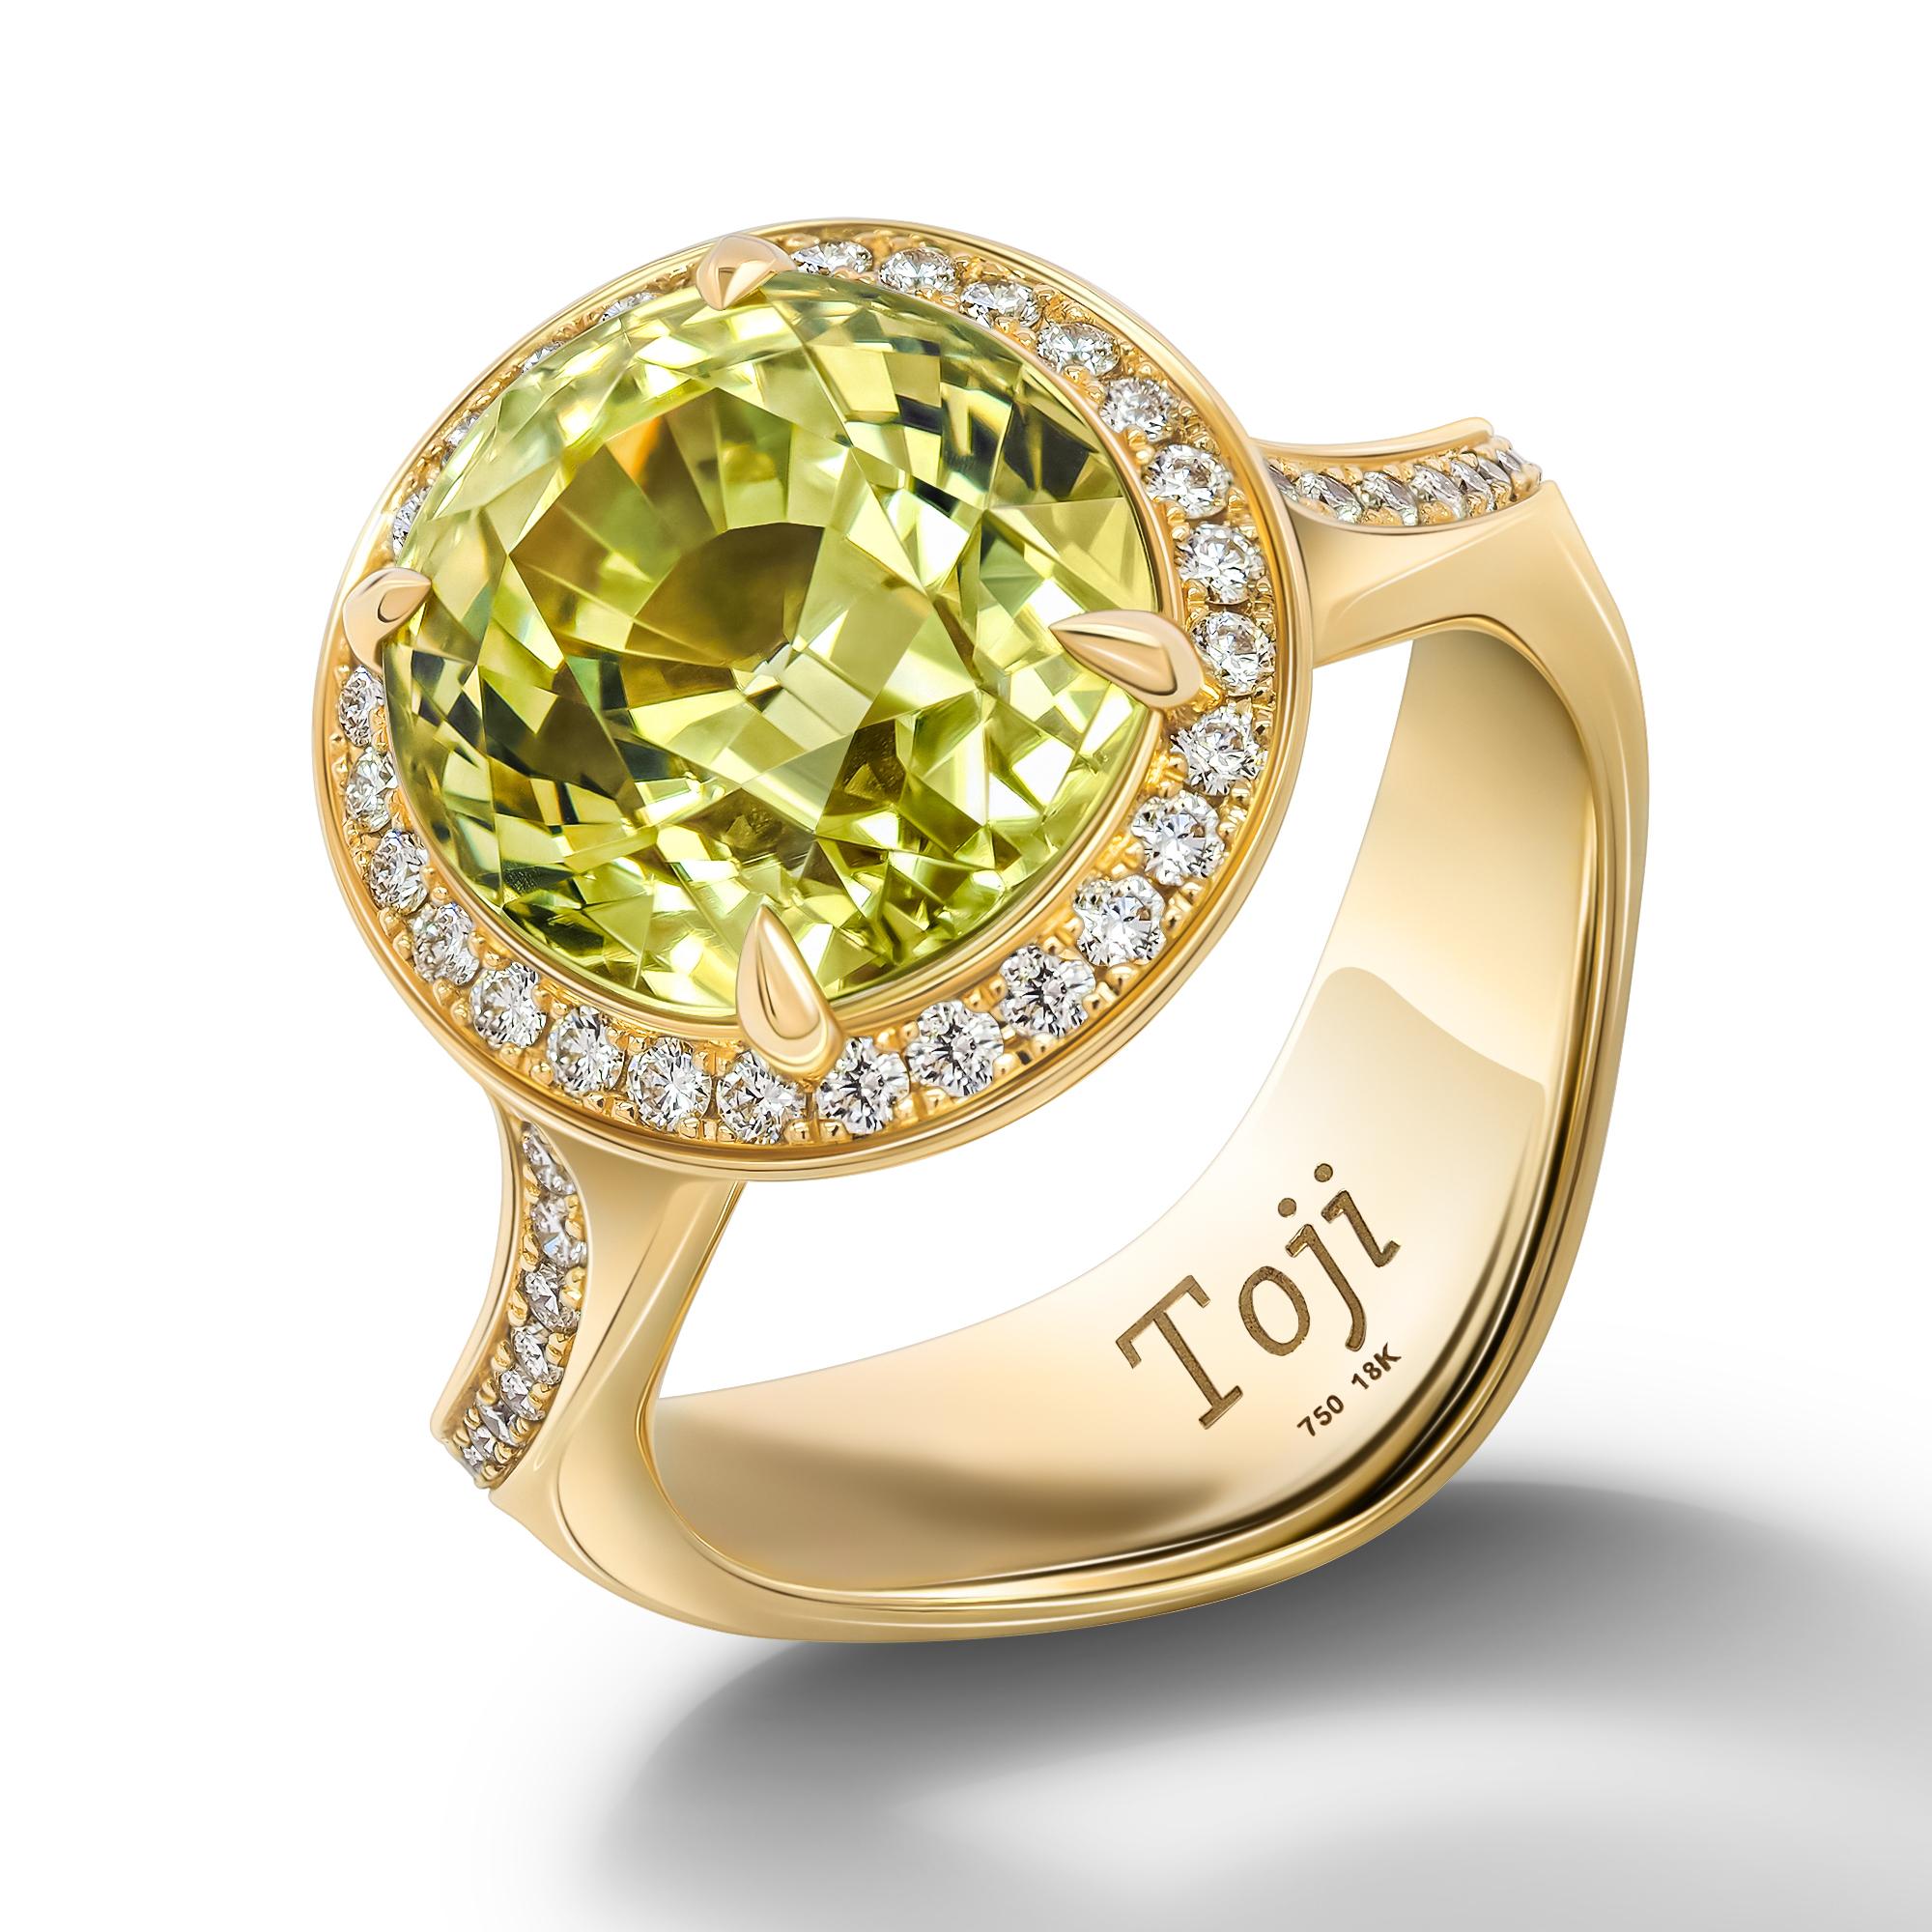 Rich color Chrysoberyl Ring 
Indian summer collection
•	18K Yellow gold.  
•	Yellow-Green Chrysoberyl in oval cut – total carat weight 8.15. 
•	Diamonds – 54 pc in round cut – total carat weight 0.38.
•	Ring size – 6.5’
•	Product weight– 9 grams.